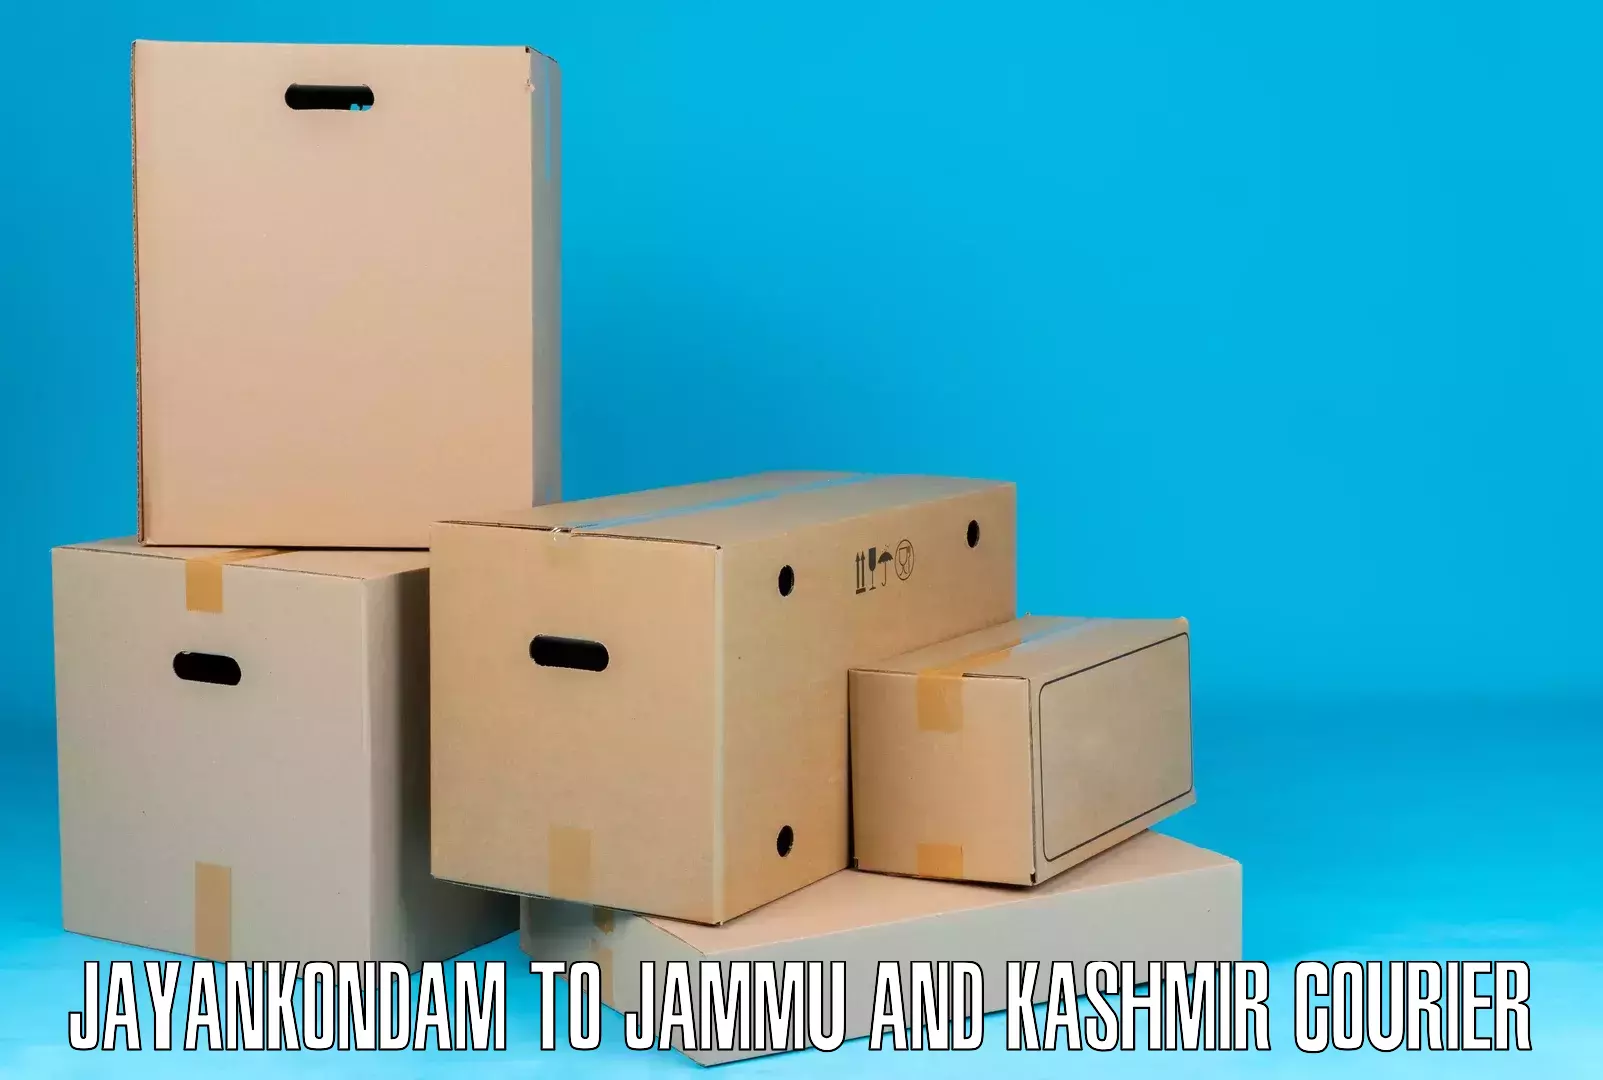 Reliable delivery network Jayankondam to Pulwama